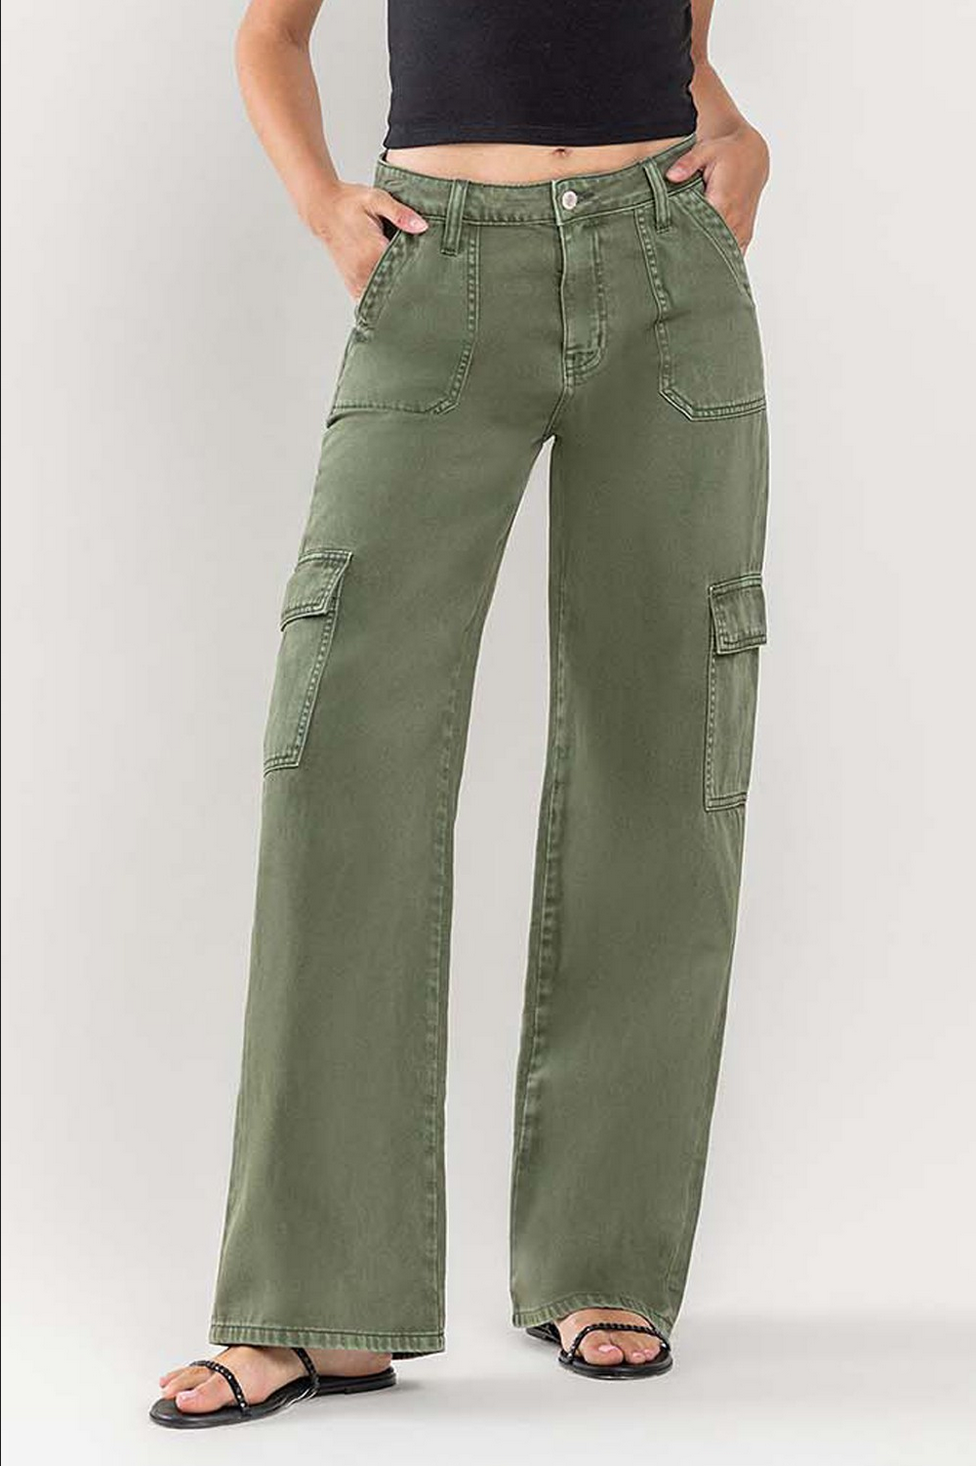 Wide Leg Cargo Utility Pants from Vervet by Flying Monkey